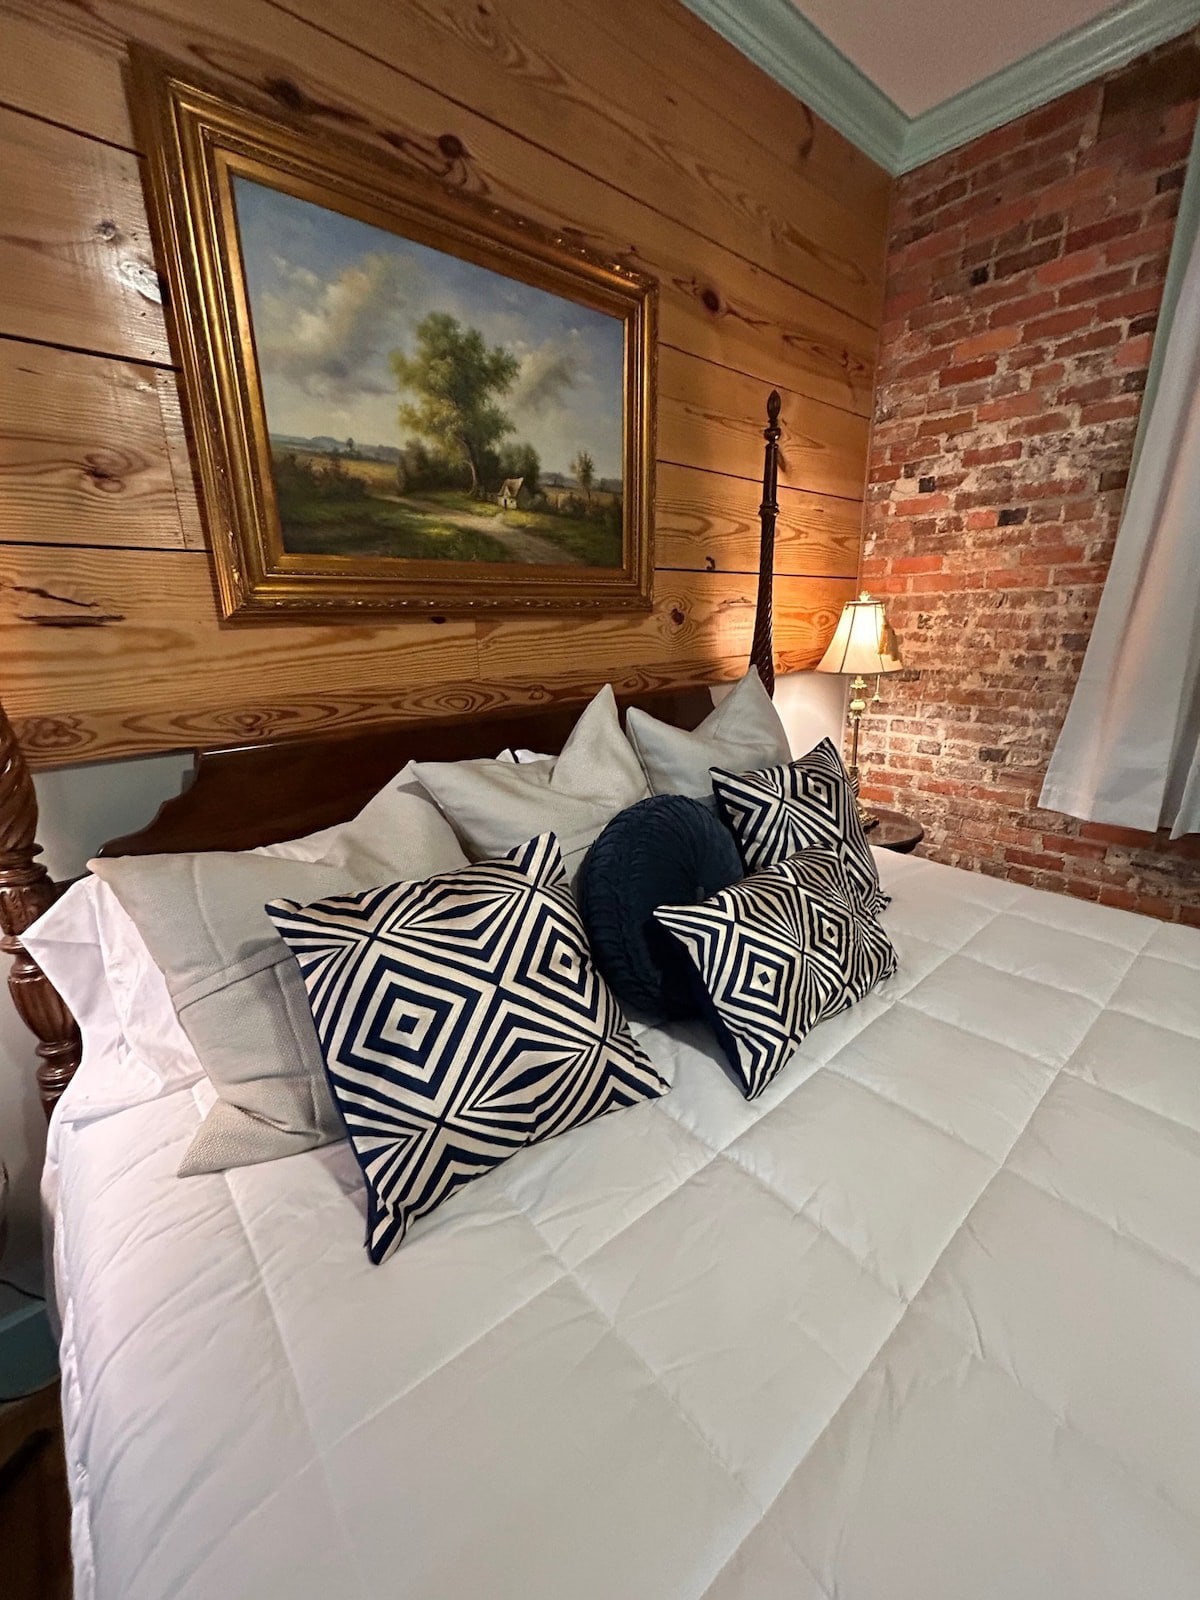 Room 4 (sleeps 2) at Chipley's Squareview Inn